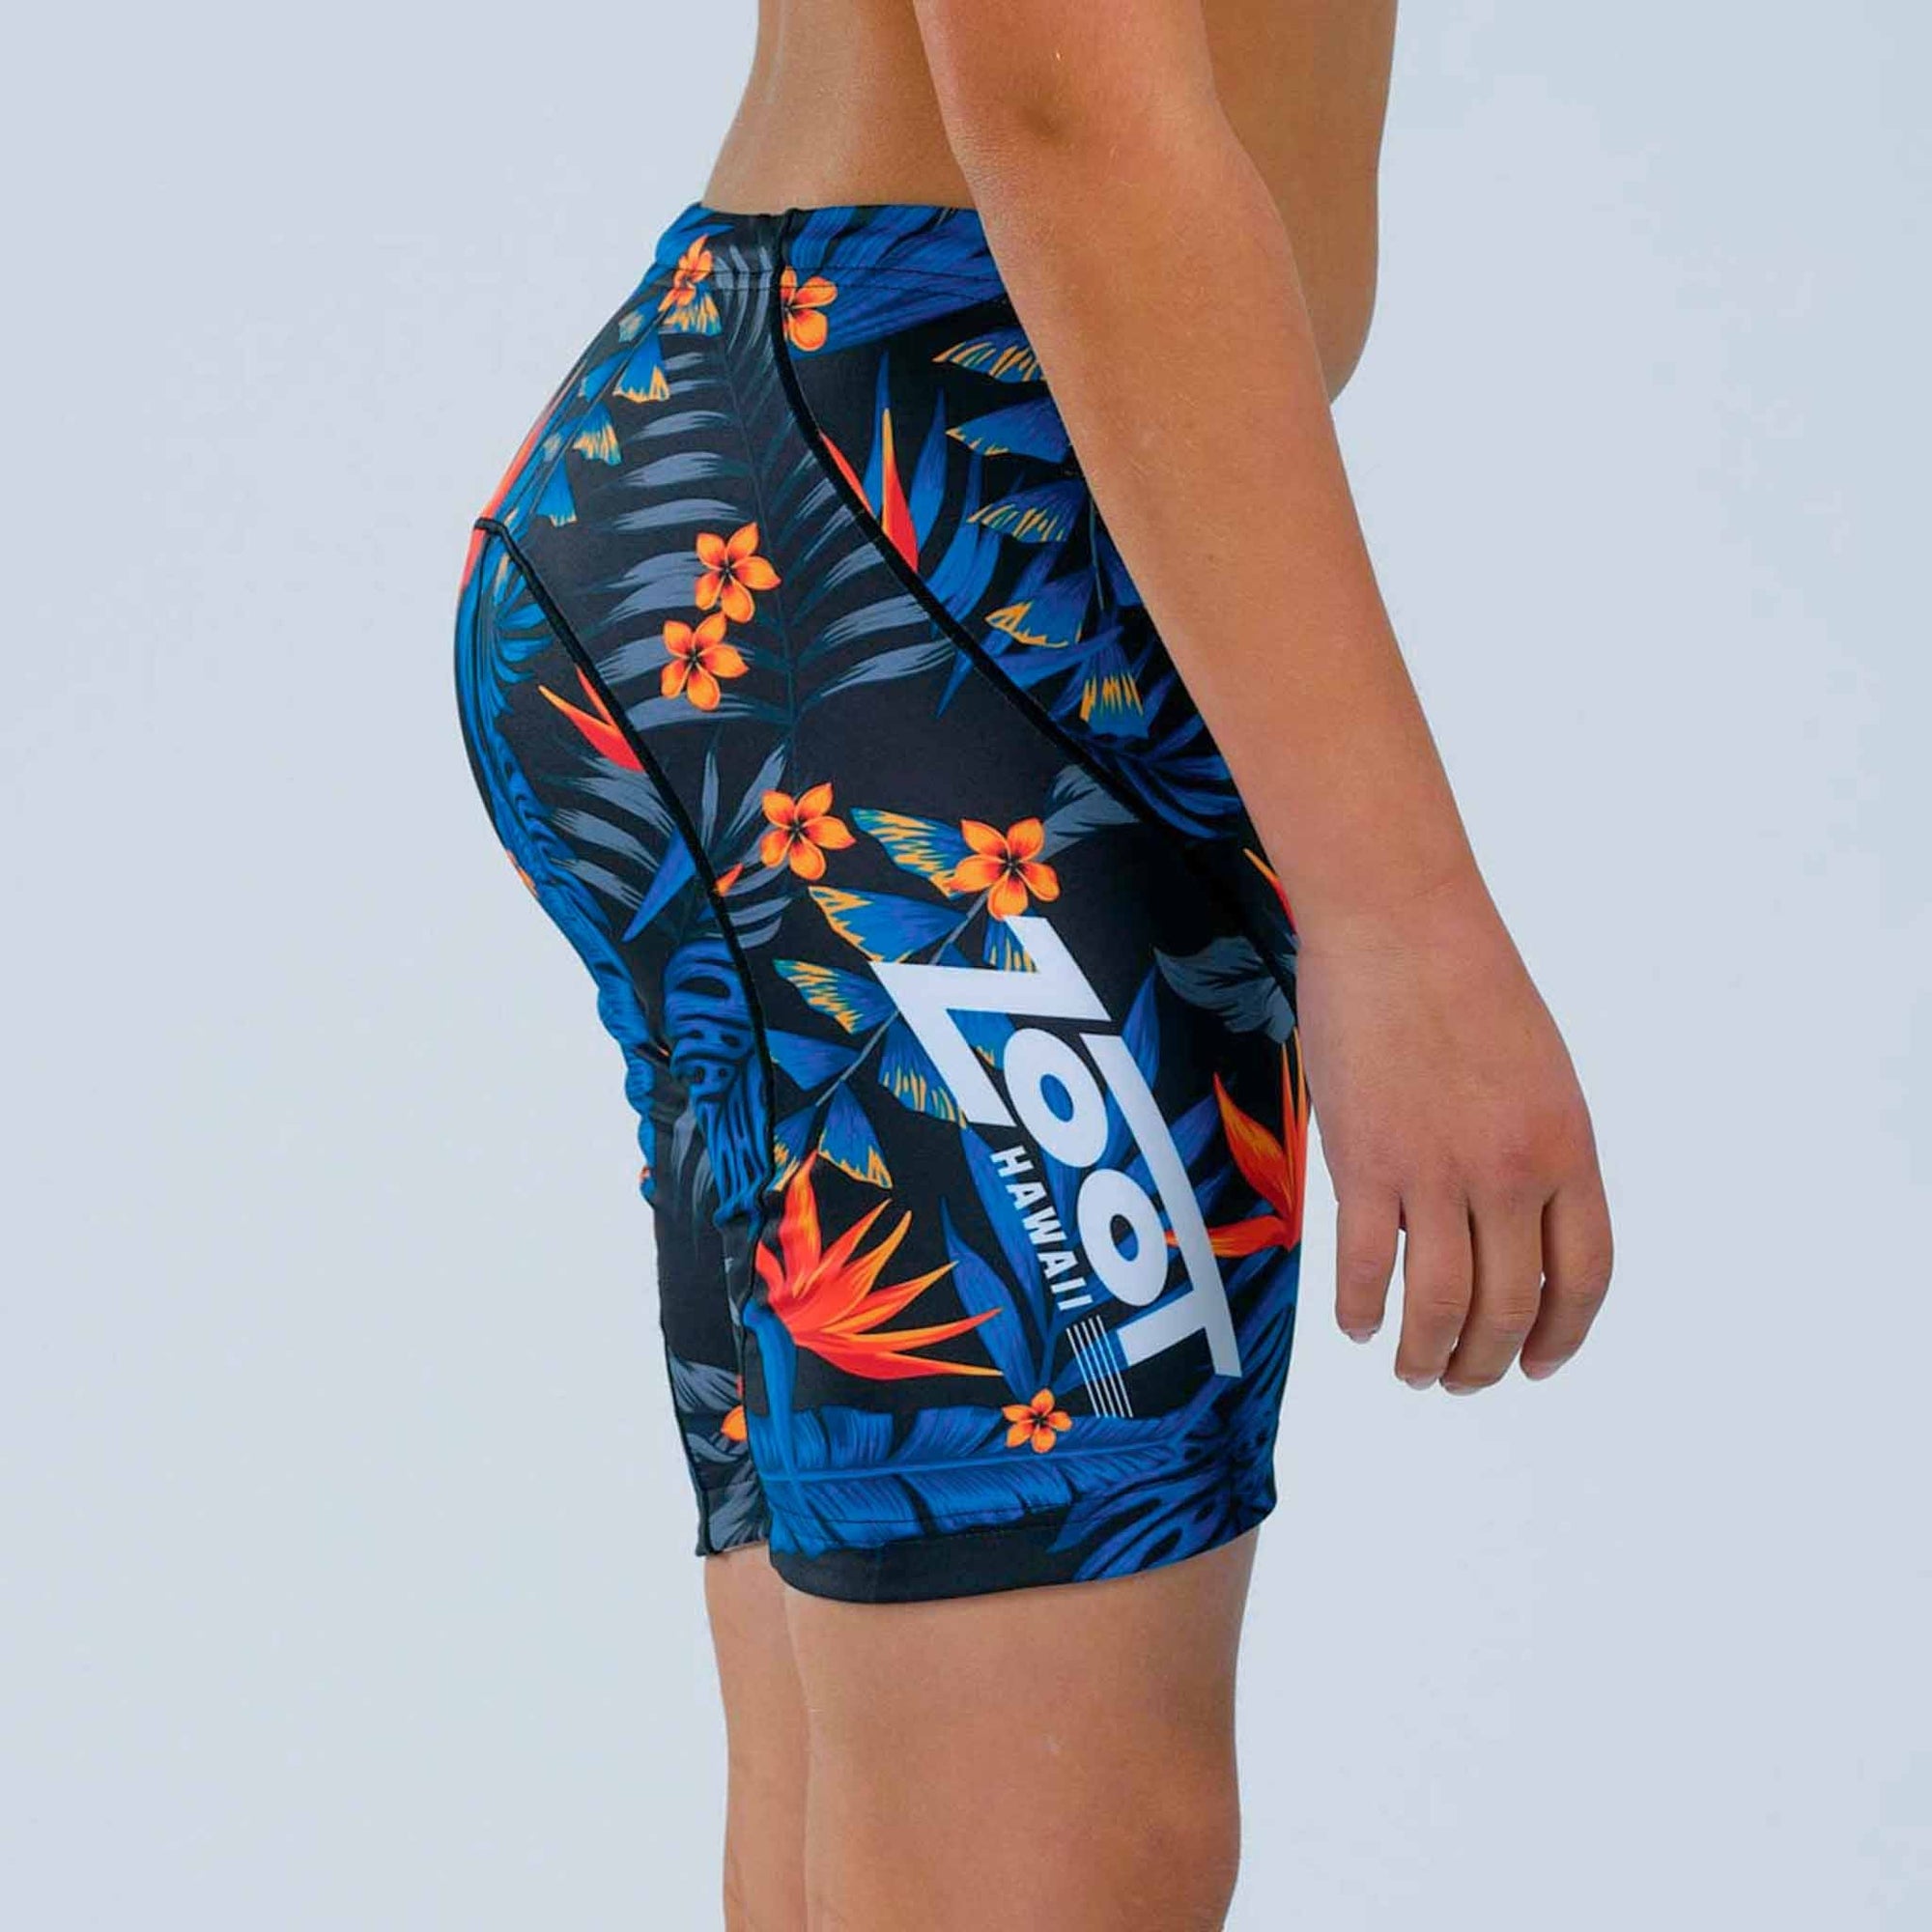 Zoot Sports KIDS Youth Protege Tri Short - 40 Years